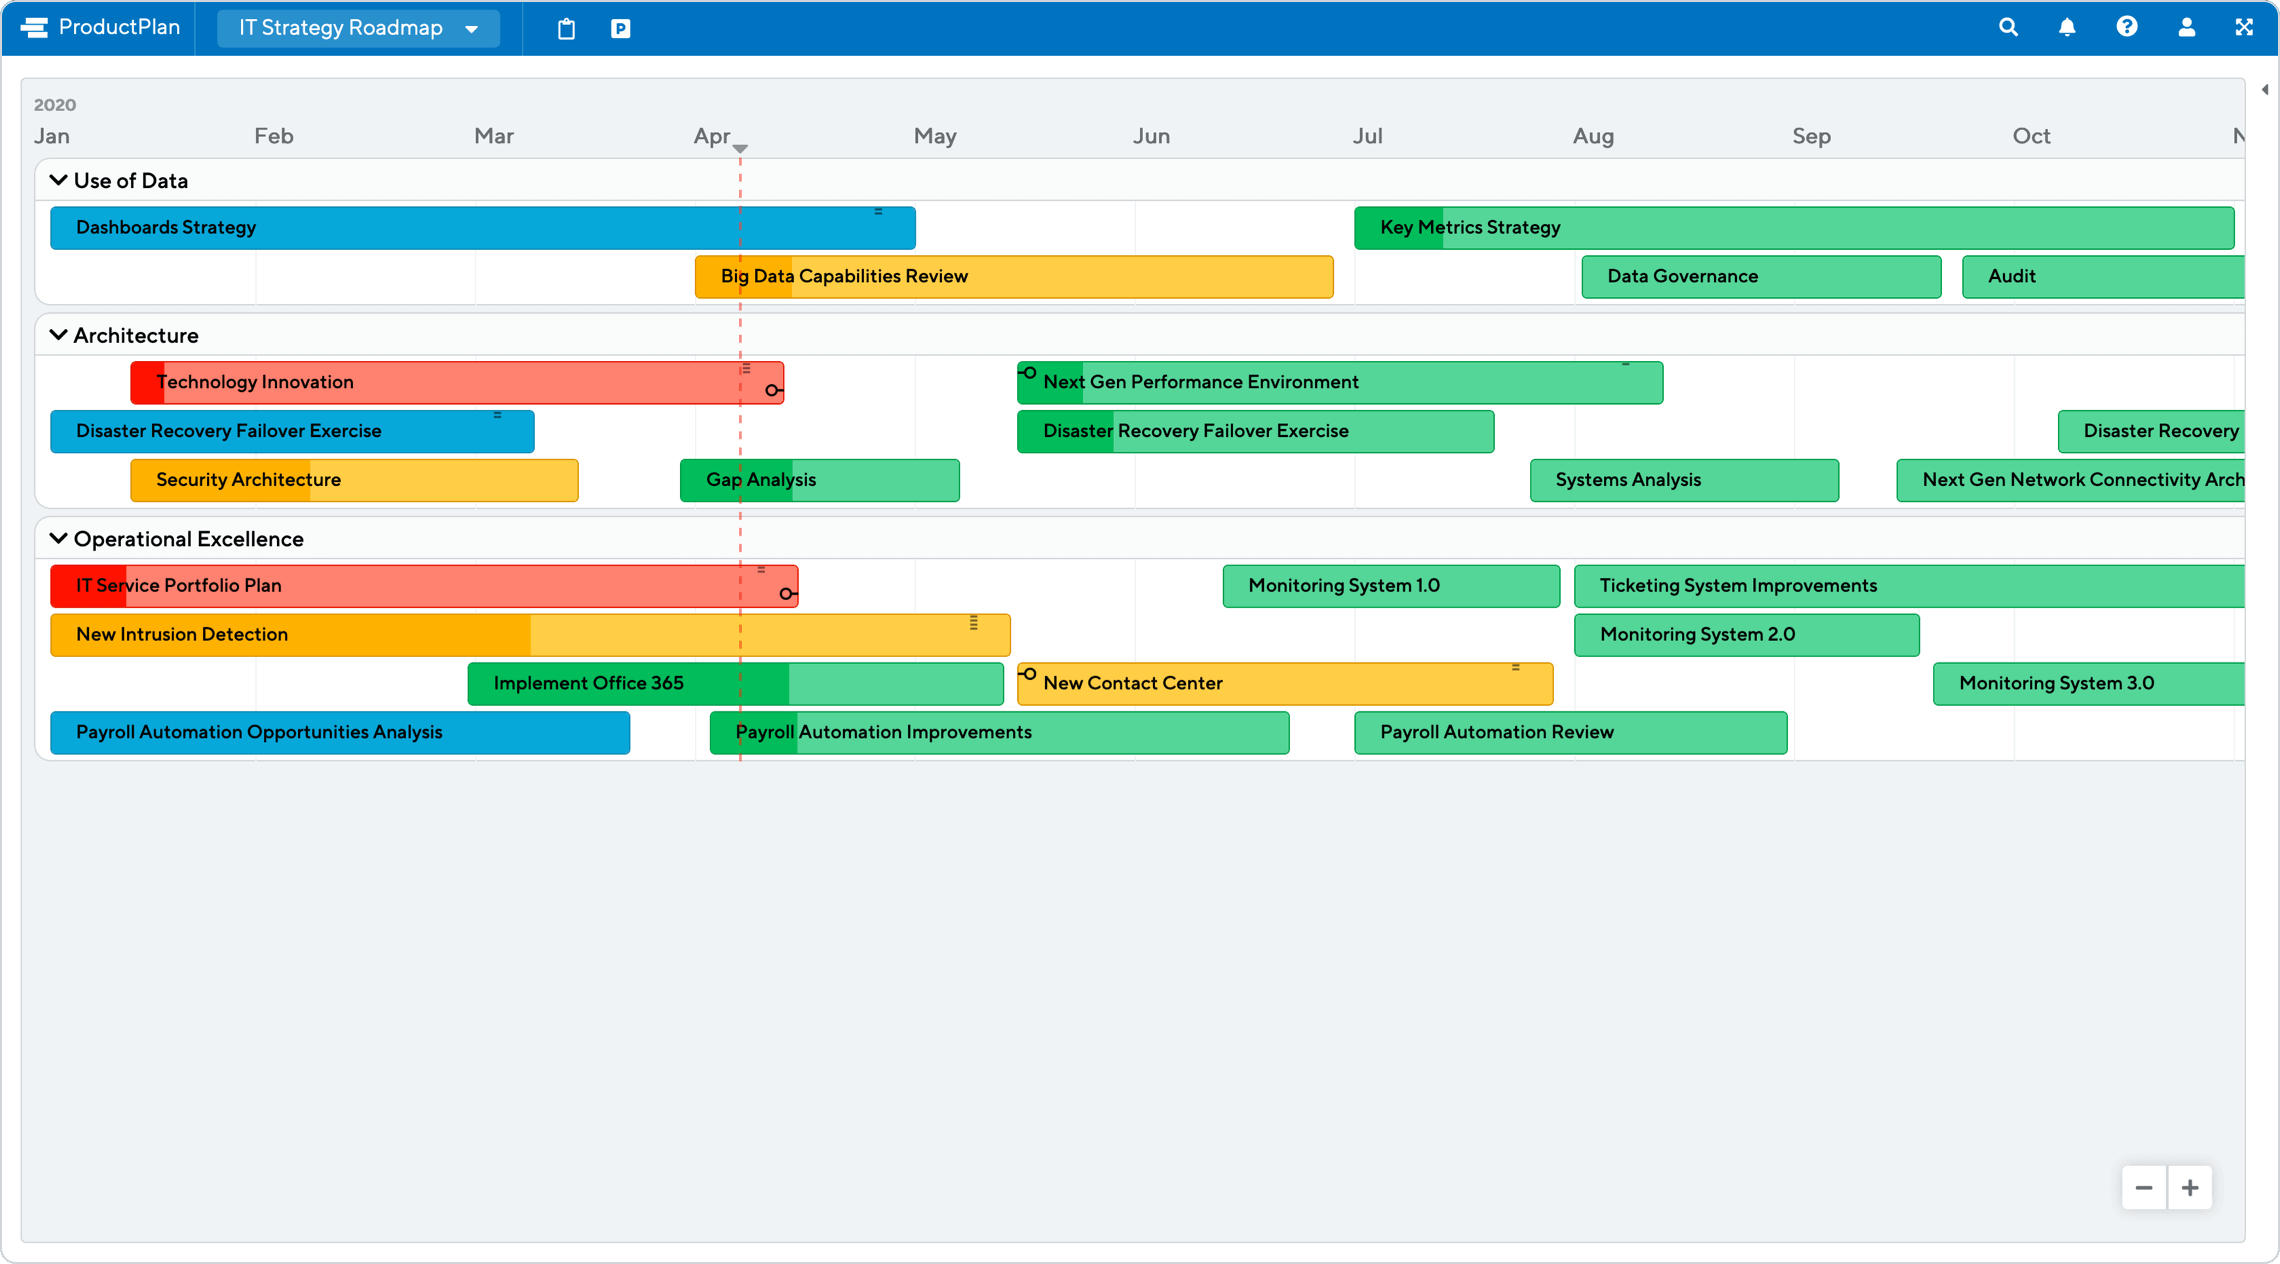 IT Strategy Roadmap Template by ProductPlan